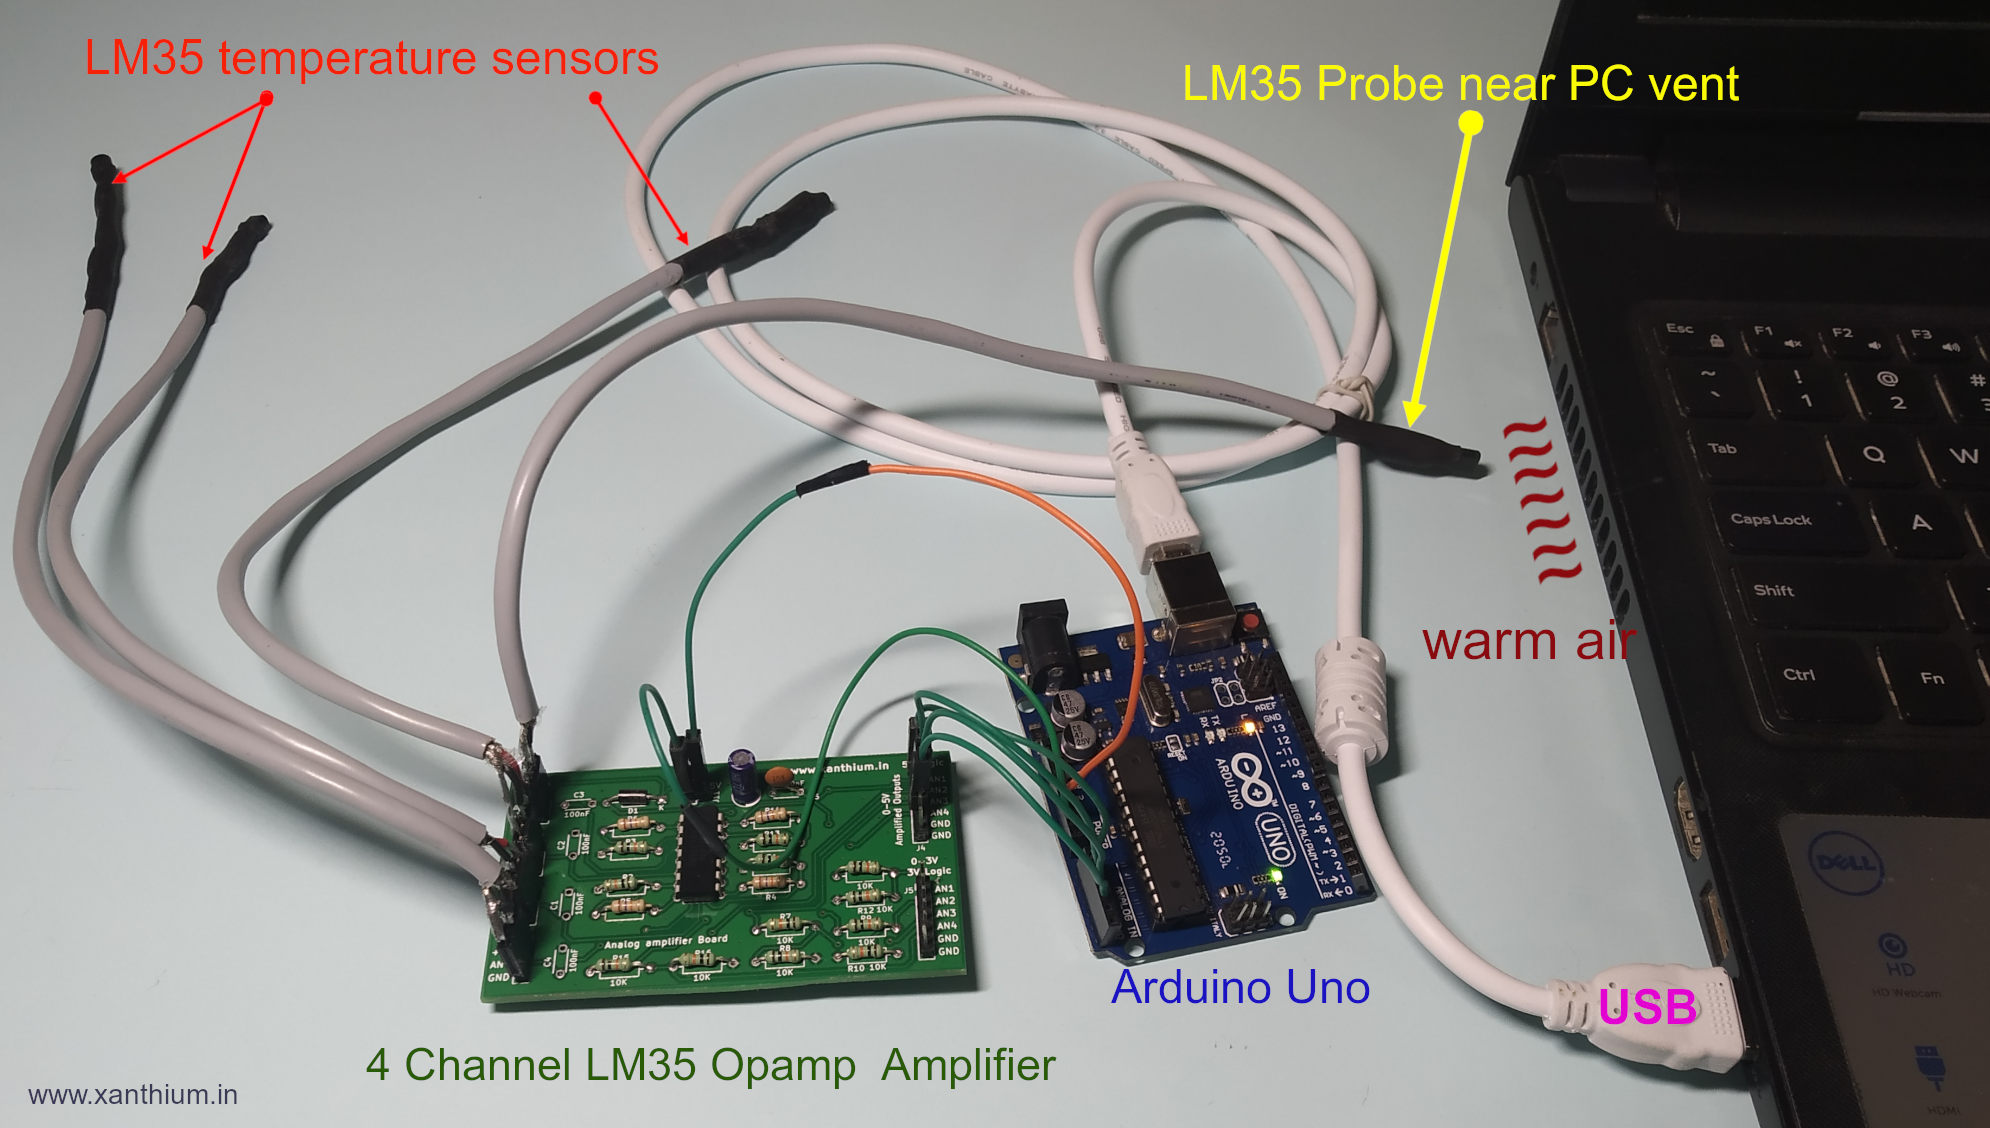 learn to build a 4 channel lm35 temperature data acquisition and logging system using Arduino and Python that saves to CSV files